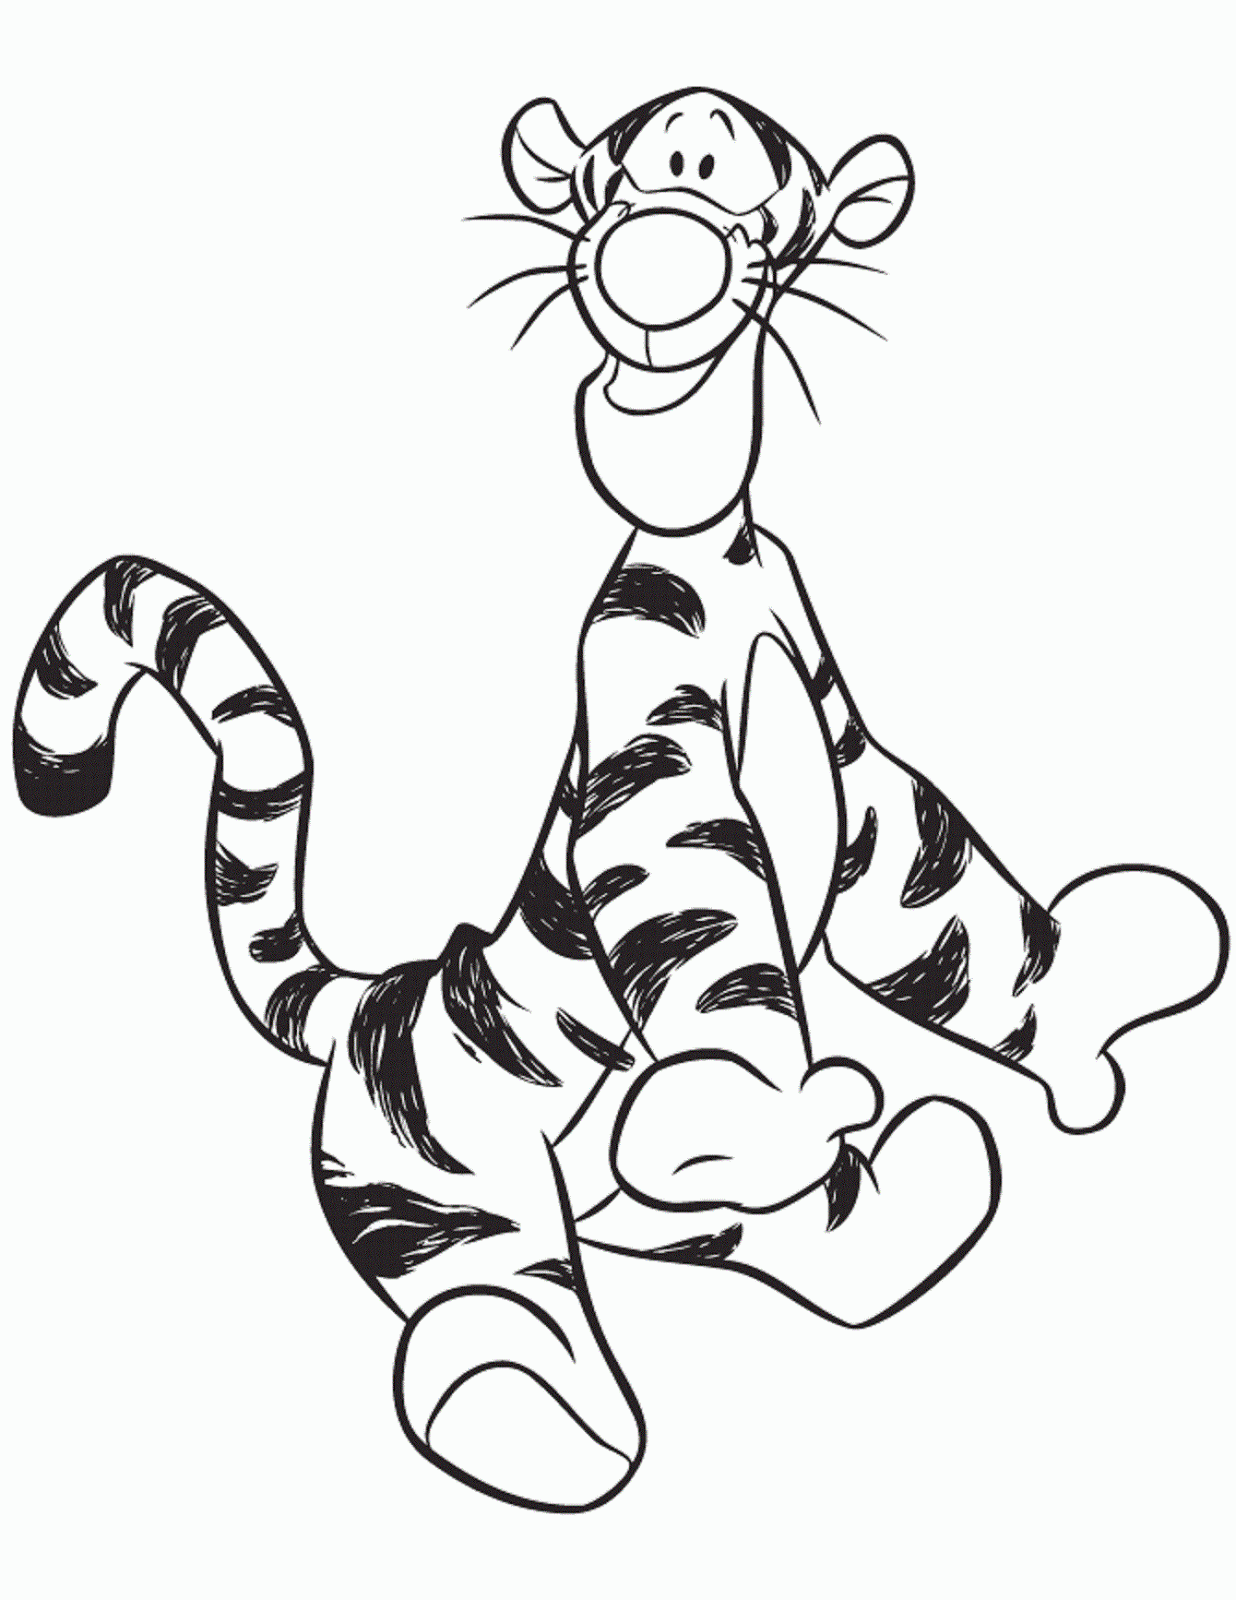 Tigger is Bouncy Winnie the Pooh Coloring Pages